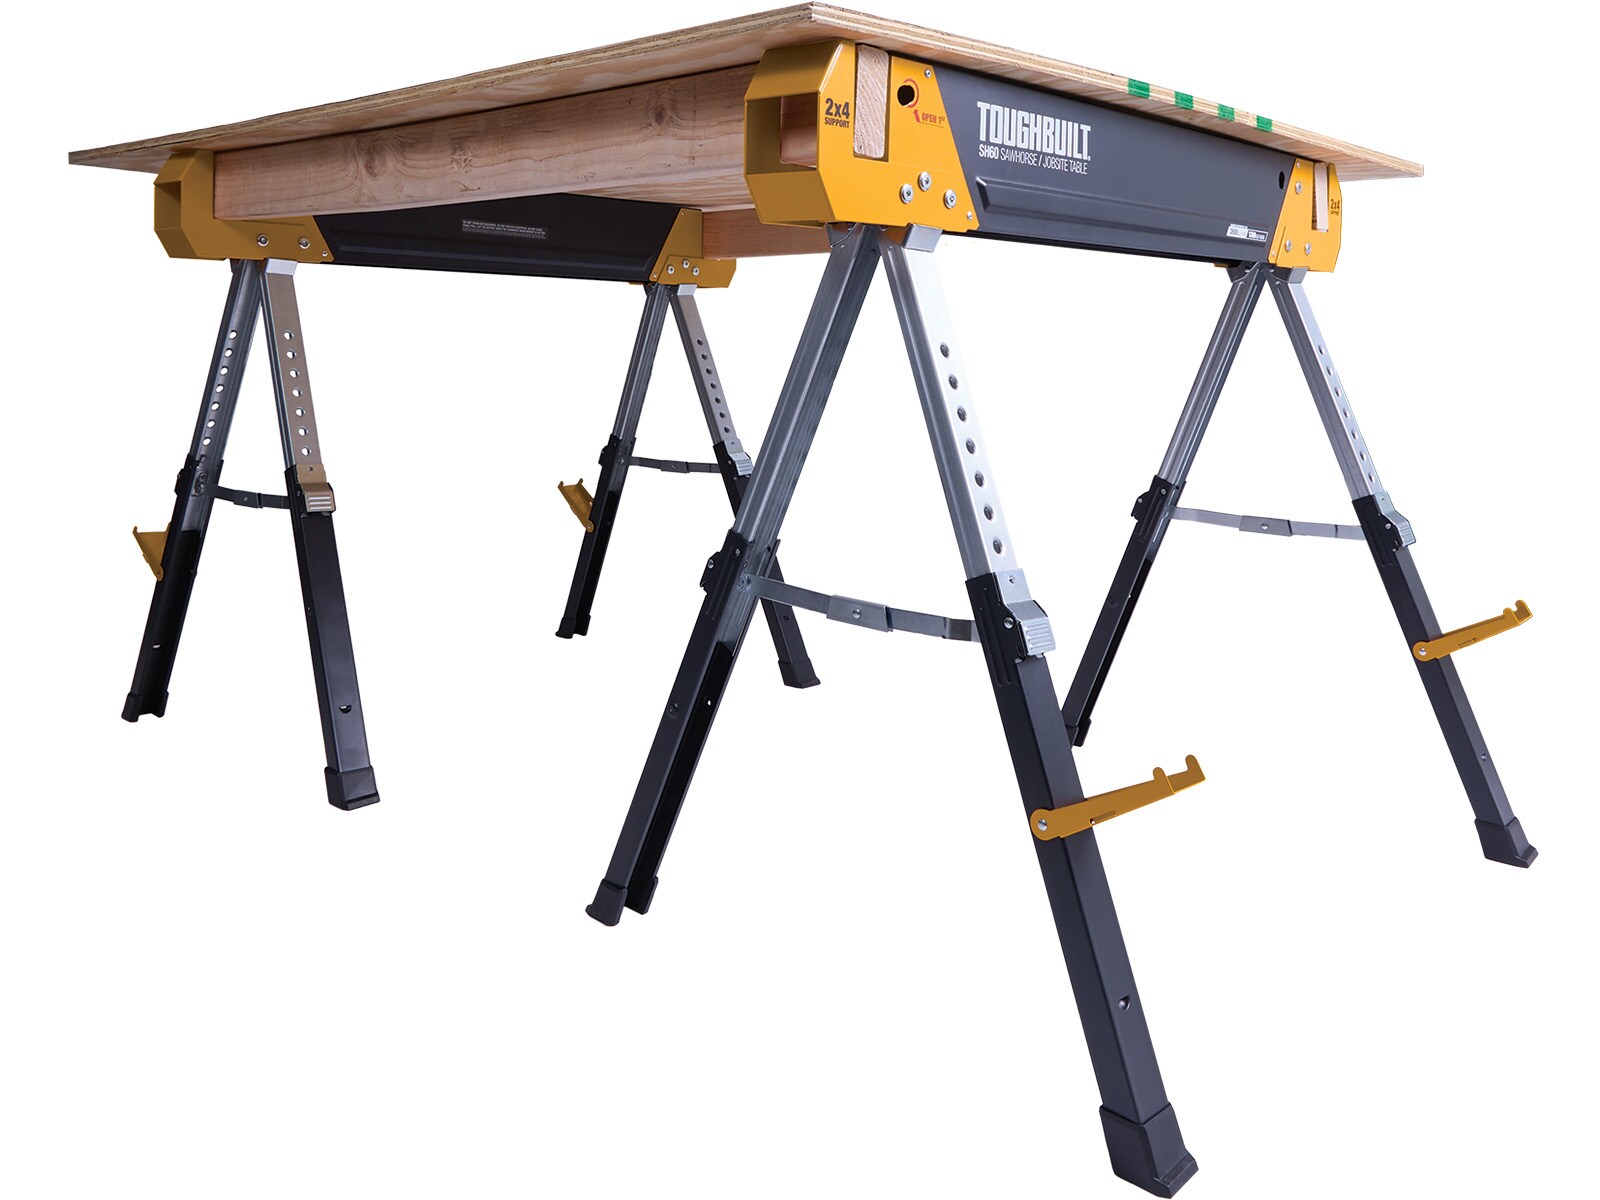 TOUGHBUILT 40.3-in W x 32-in H Adjustable Steel Saw Horse (1300-lb 